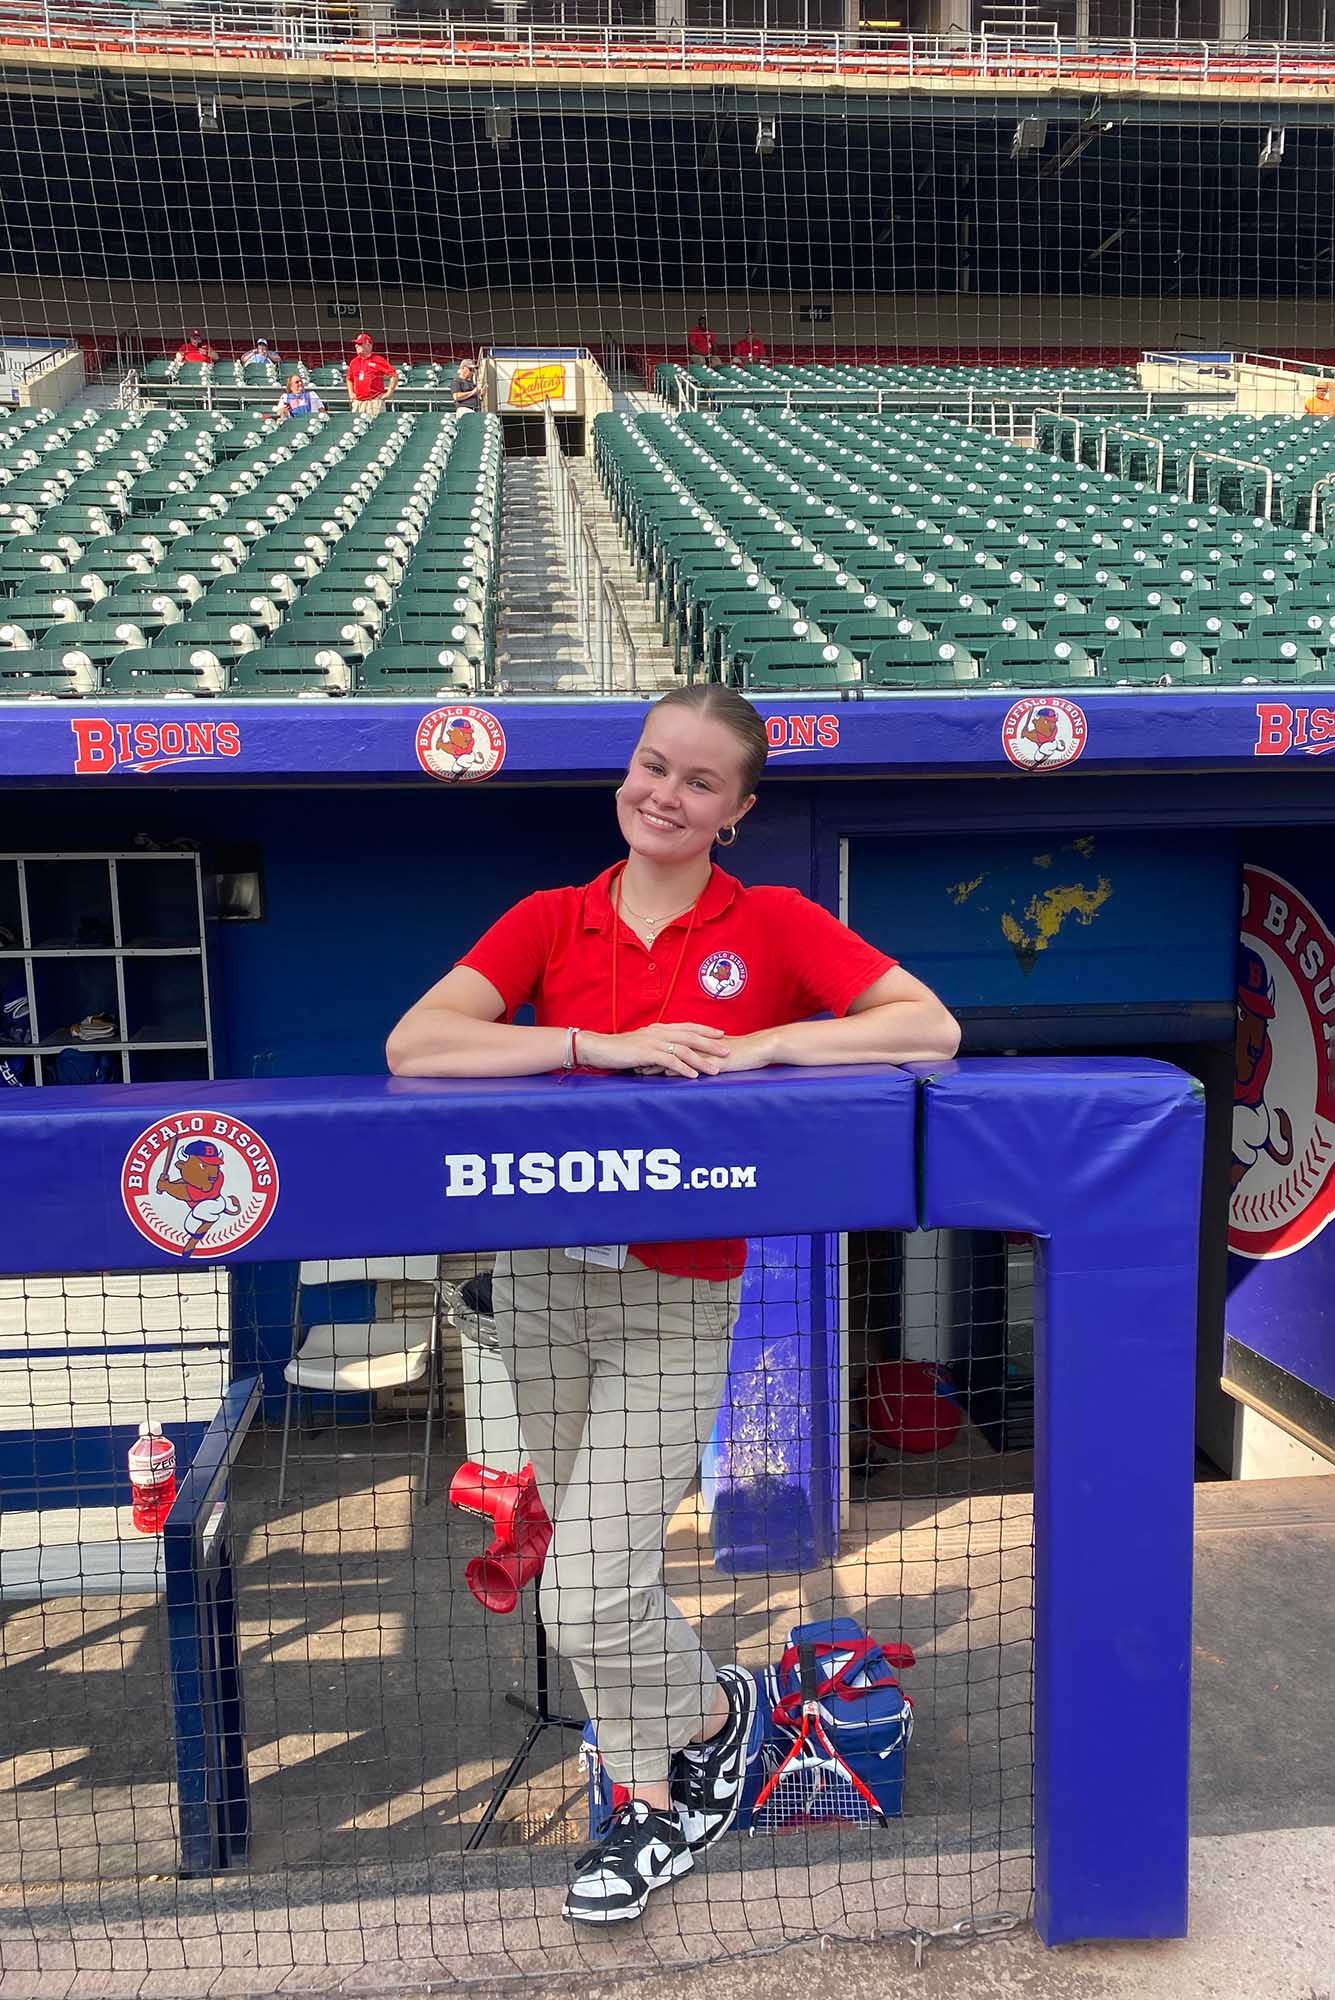 Photo: A young white woman with a red collared shirt and khakis leans on a blue fence in front of stadium seats. She smiles for the camera.